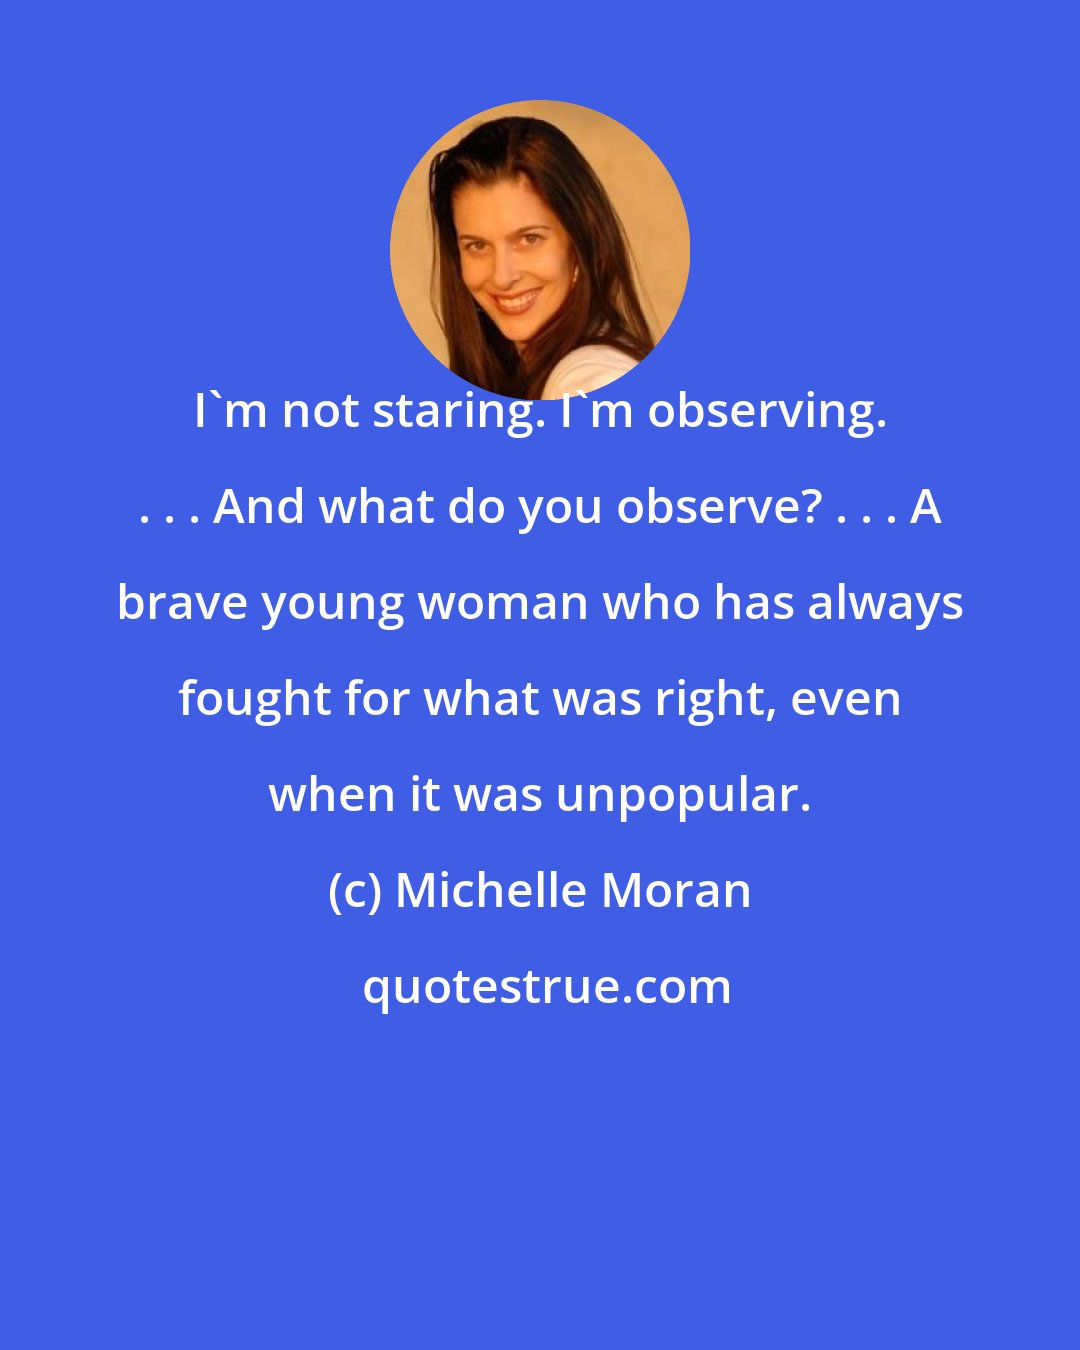 Michelle Moran: I'm not staring. I'm observing. . . . And what do you observe? . . . A brave young woman who has always fought for what was right, even when it was unpopular.